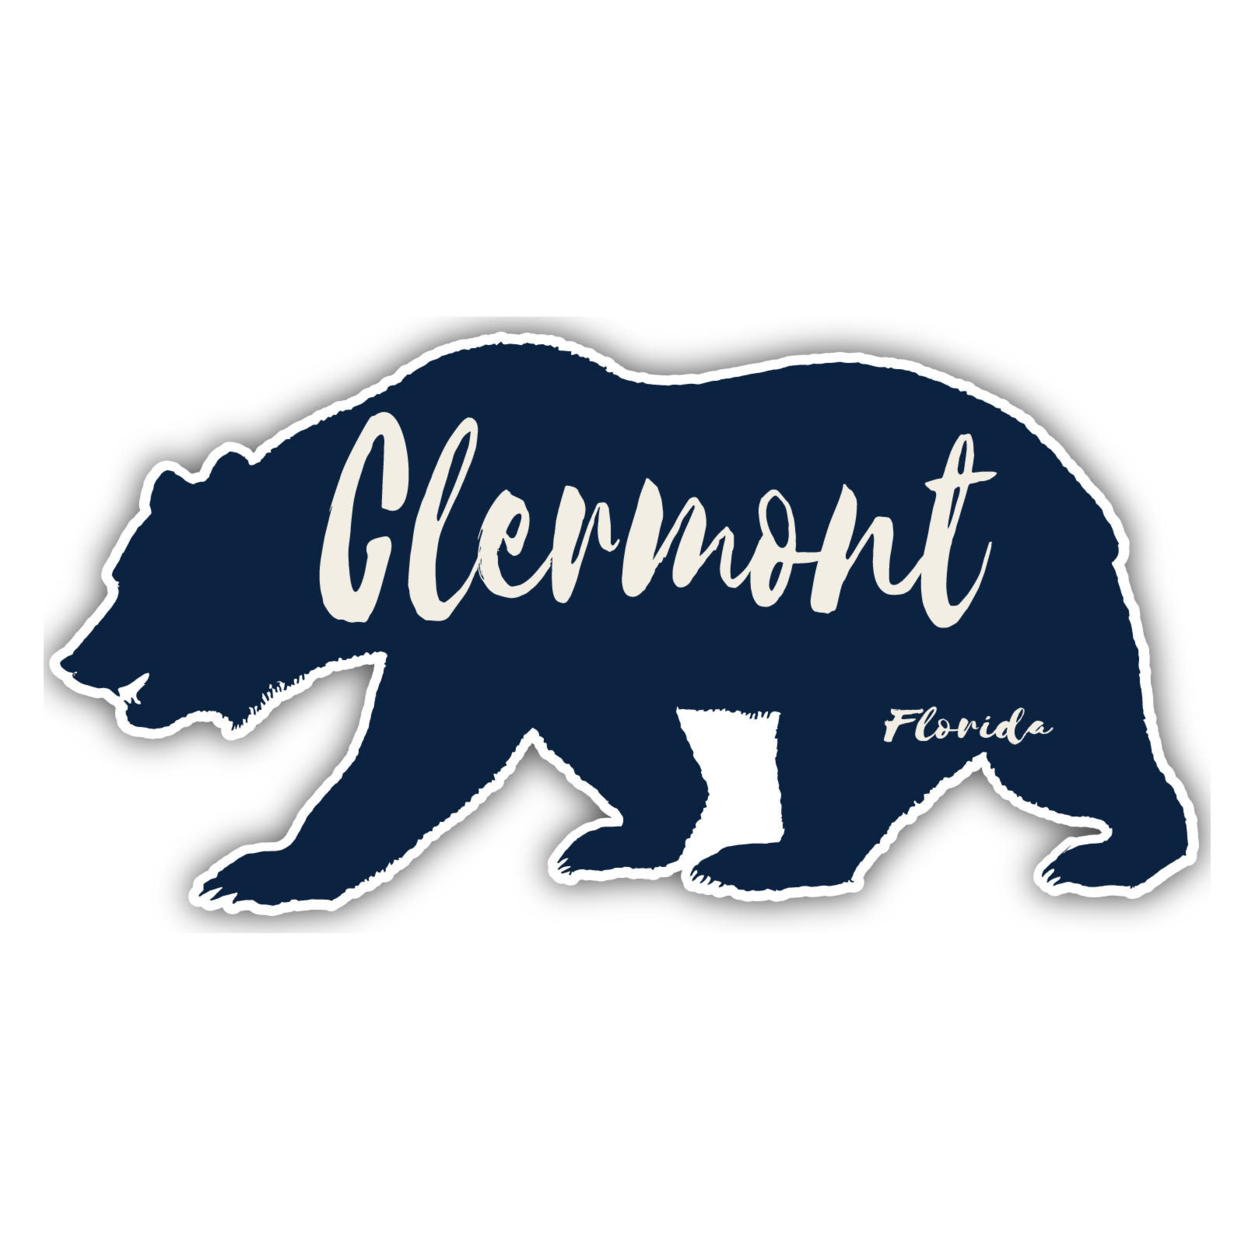 Clermont Florida Souvenir Decorative Stickers (Choose Theme And Size) - 4-Pack, 6-Inch, Bear